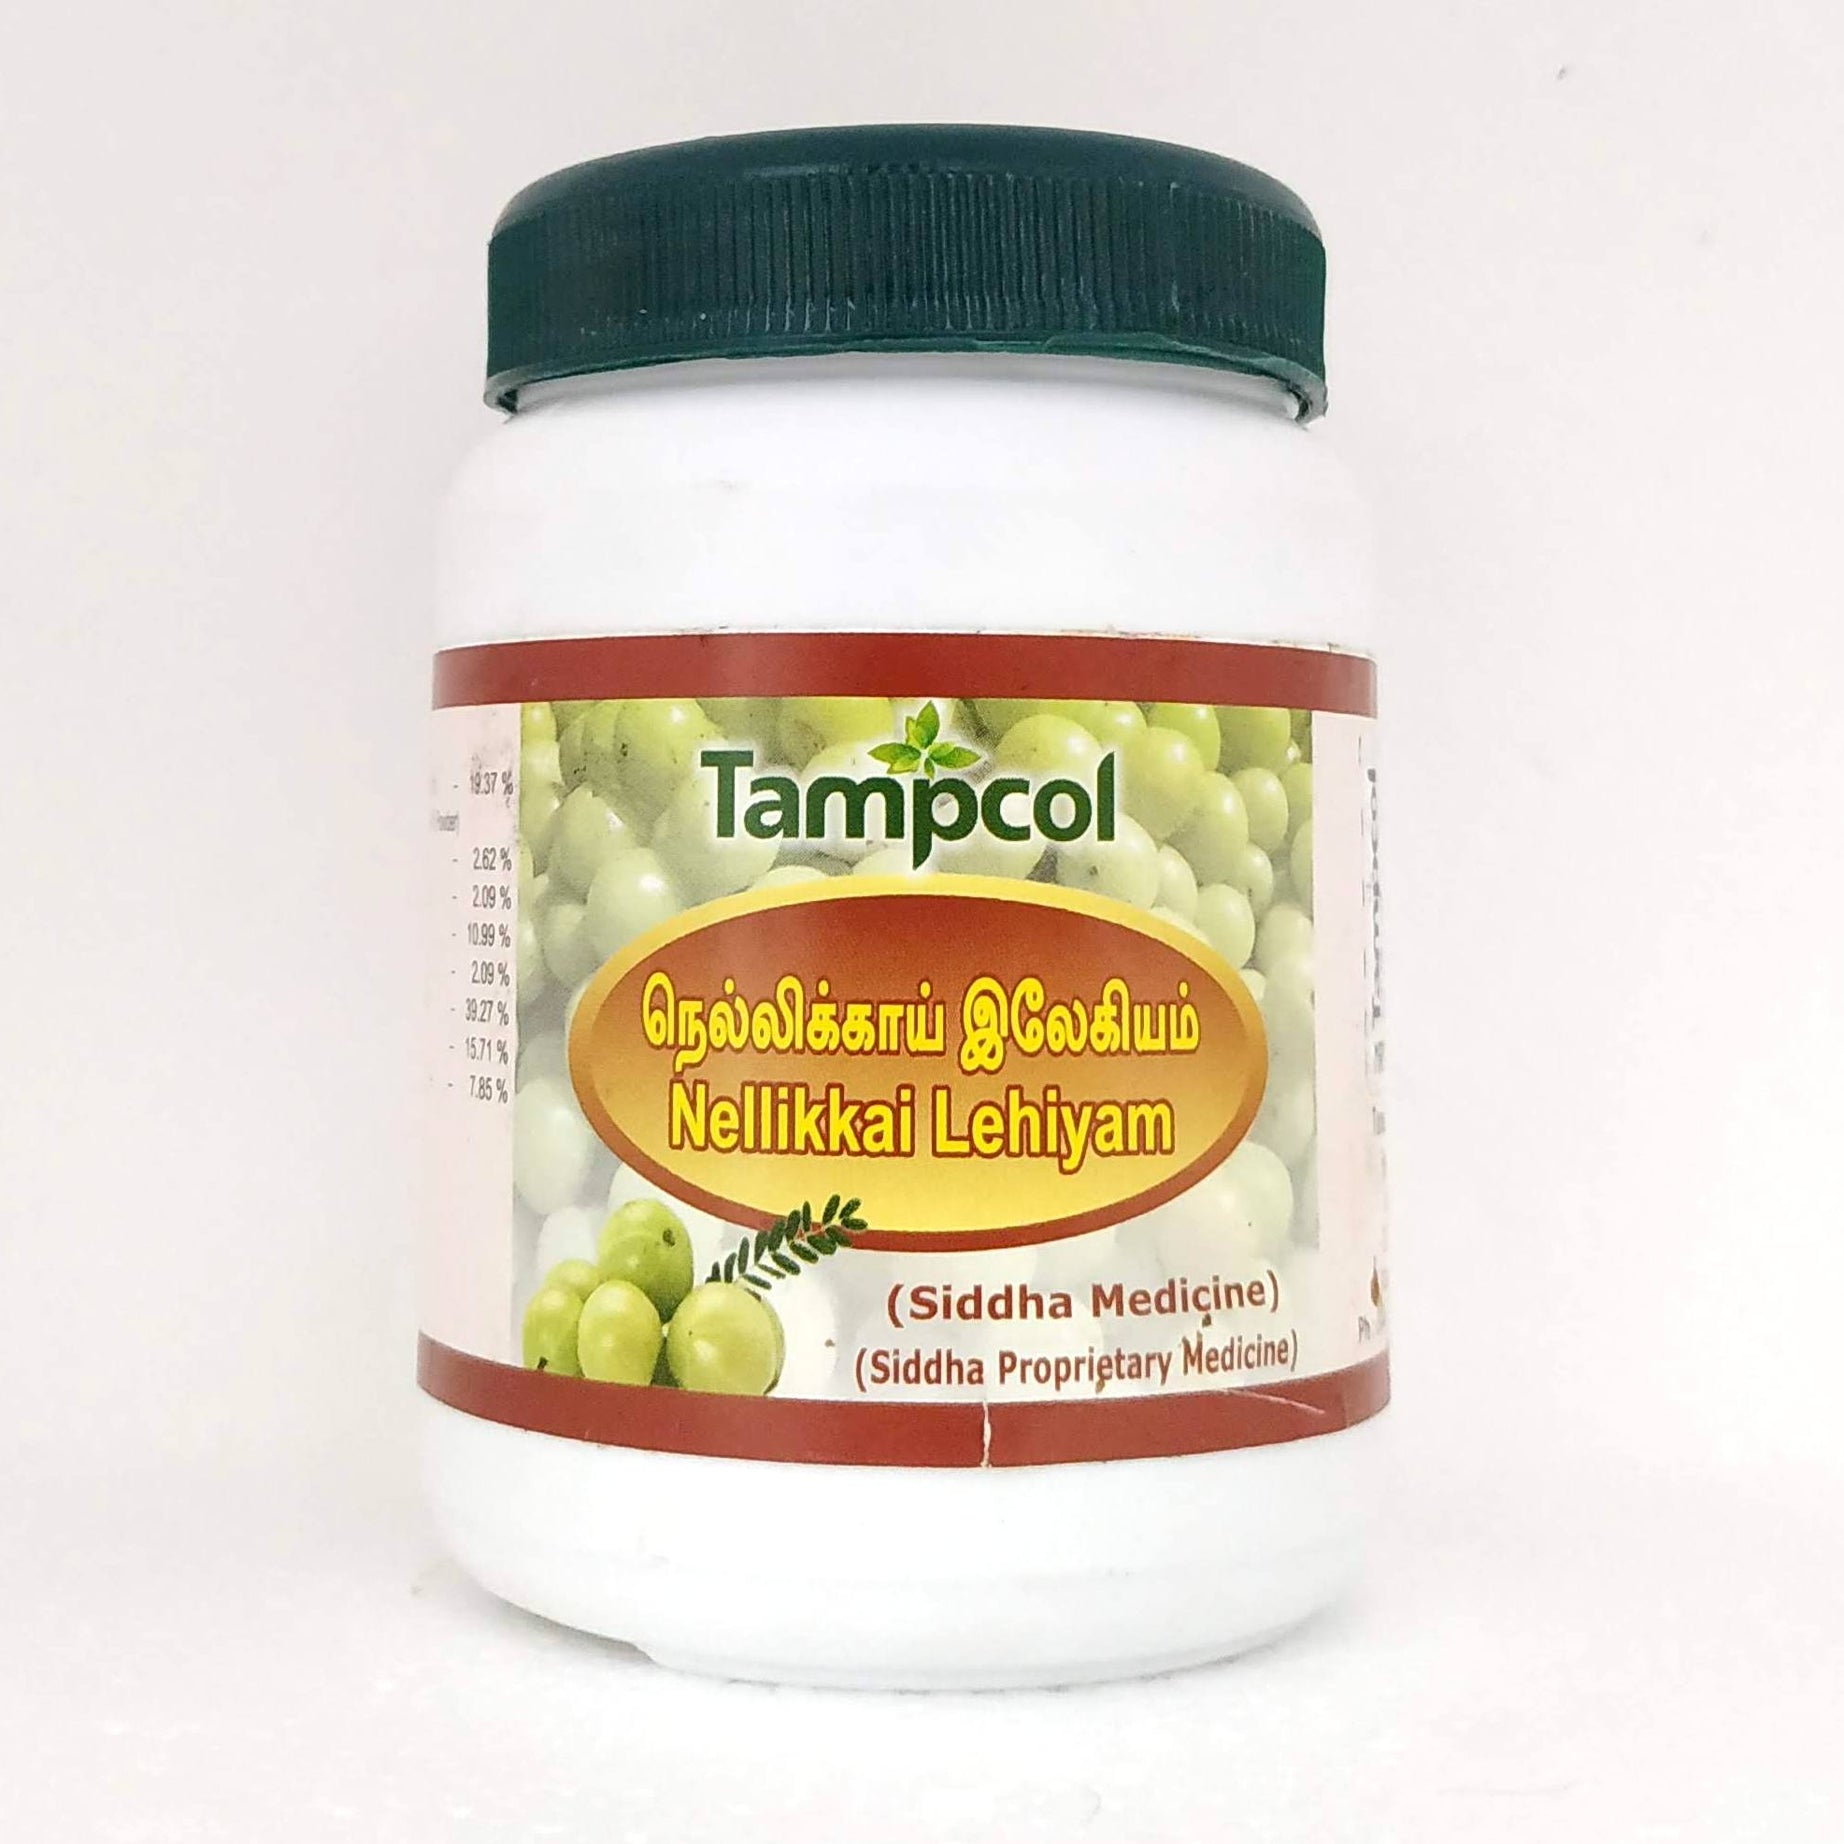 Shop Nellikai lehyam 200gm at price 150.41 from Tampcol Online - Ayush Care